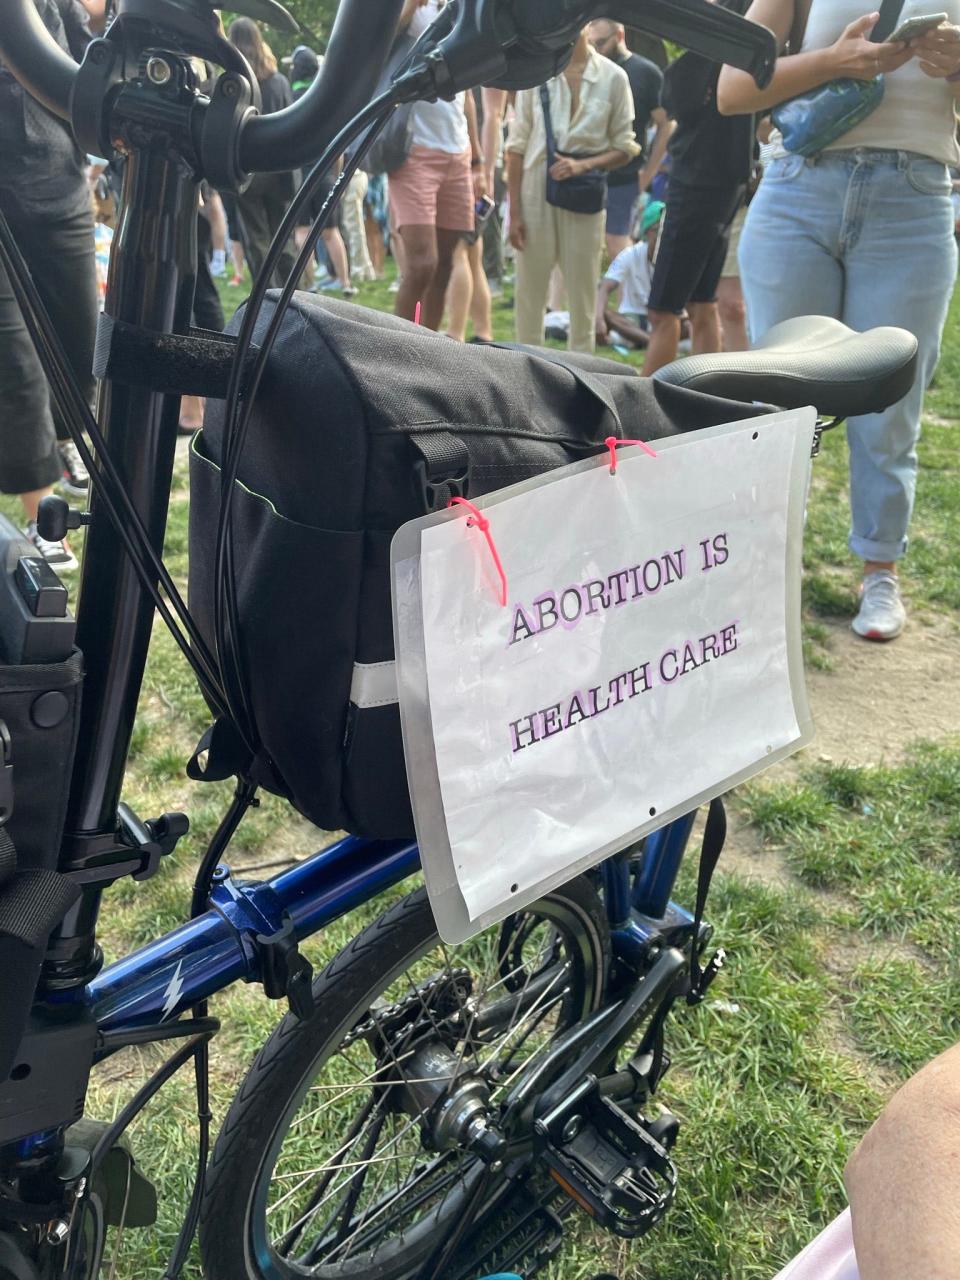 A photo of one of the last-minute signs Piglet Evans made for the protest after realizing her old protest sign saying "Keep Abortion Legal" was suddenly rendered useless since Roe v. Wade was struck down.